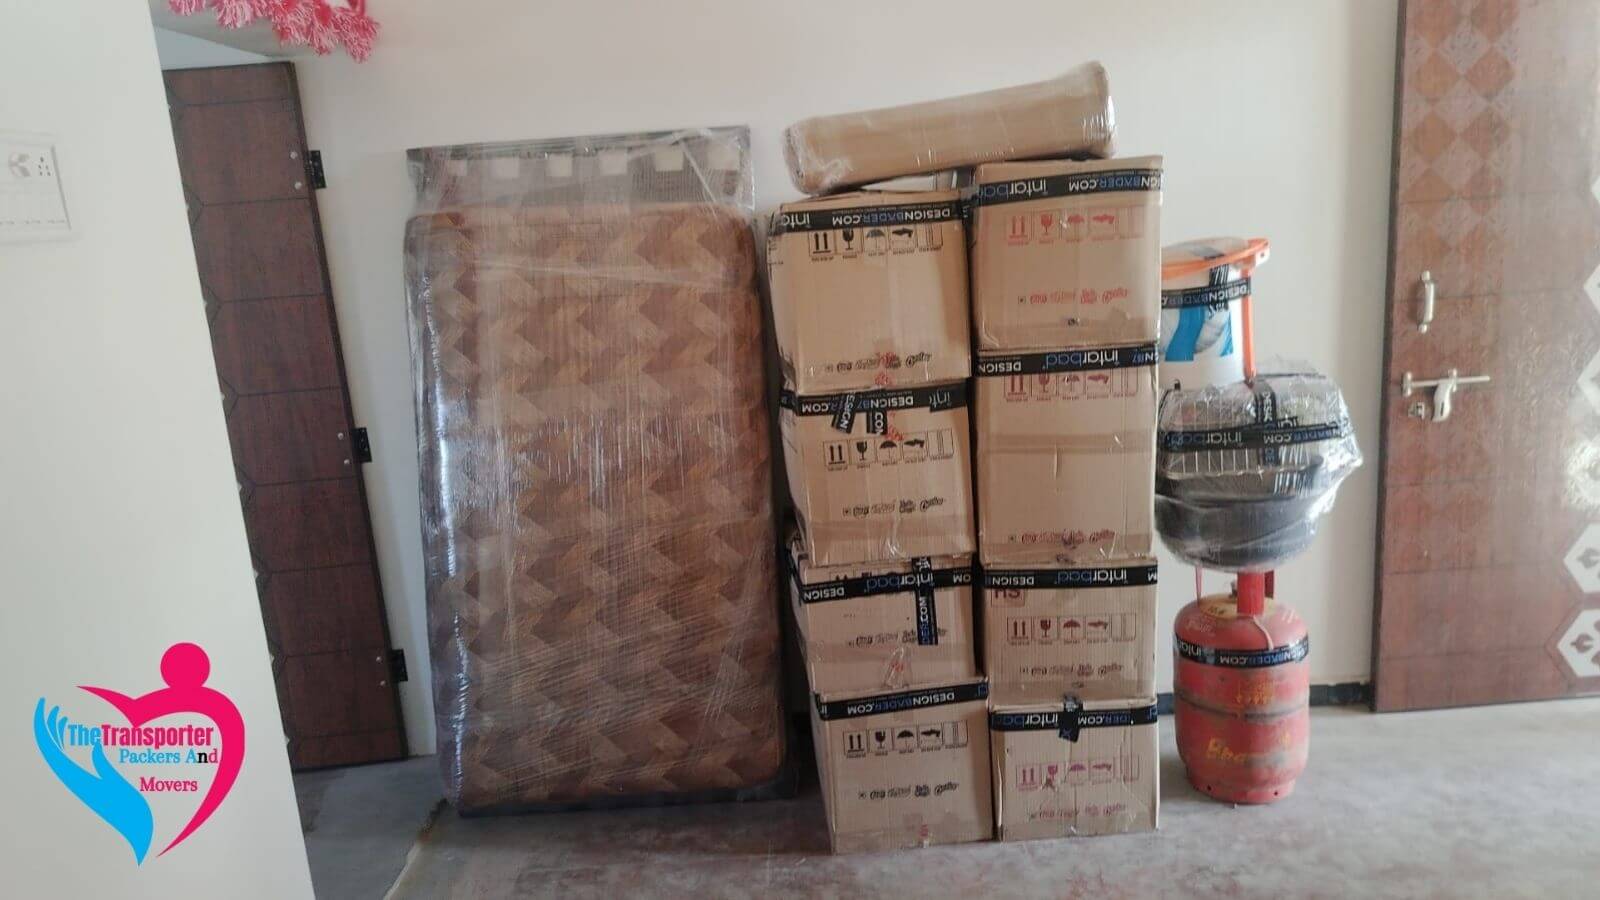 TheTransporter Packers and Movers in Meerut - Our Commitment to You